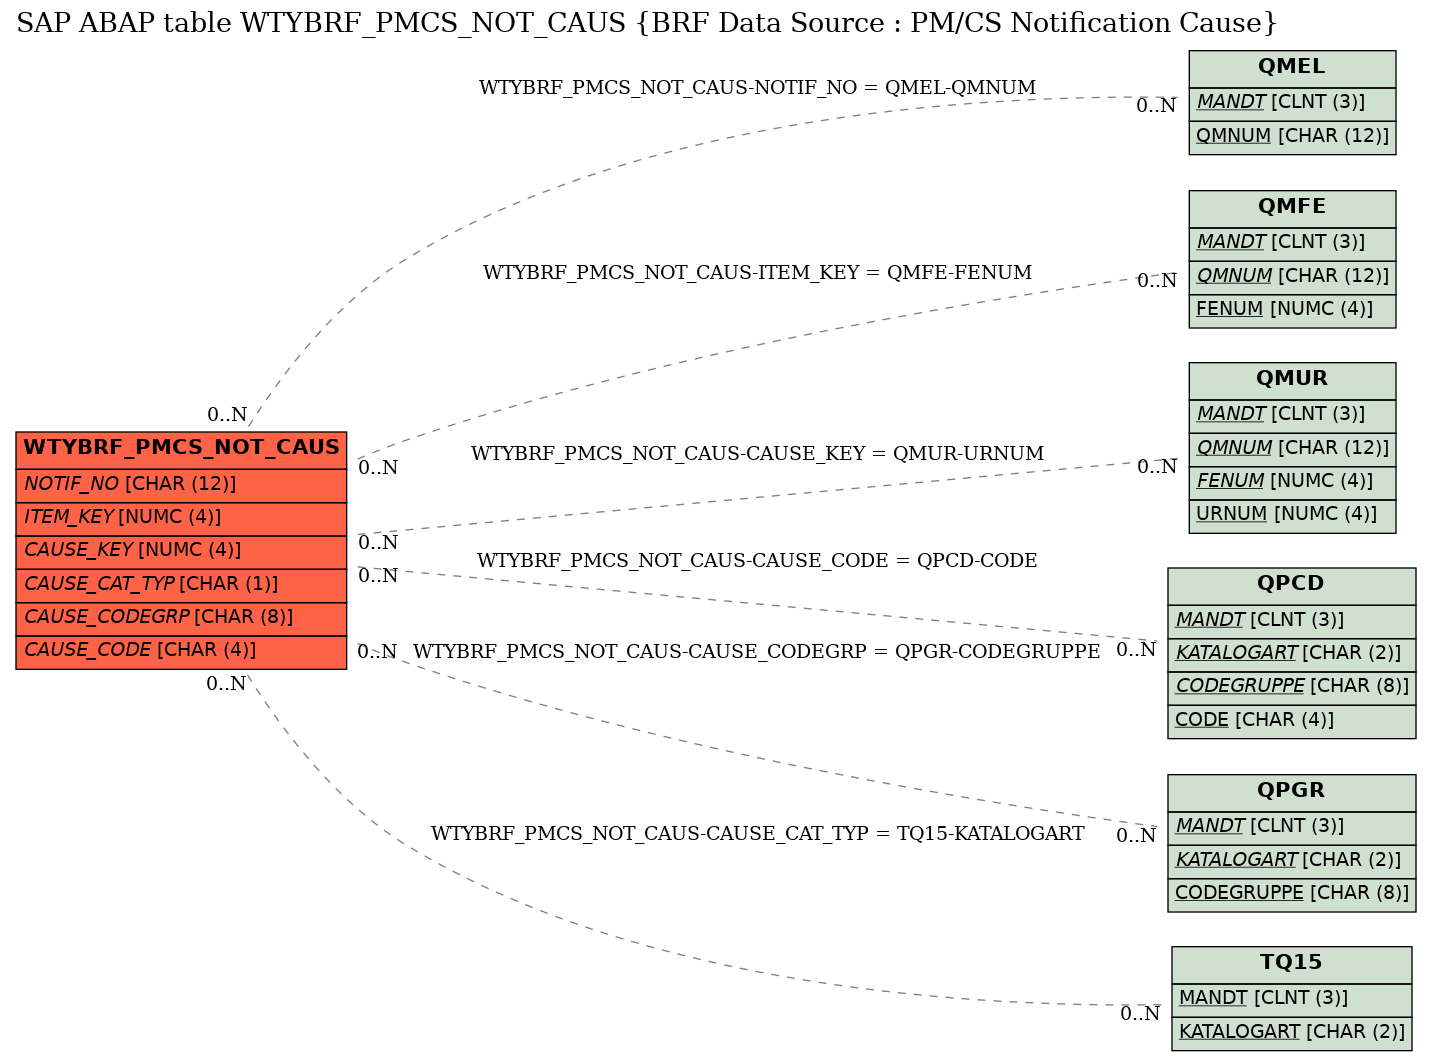 E-R Diagram for table WTYBRF_PMCS_NOT_CAUS (BRF Data Source : PM/CS Notification Cause)